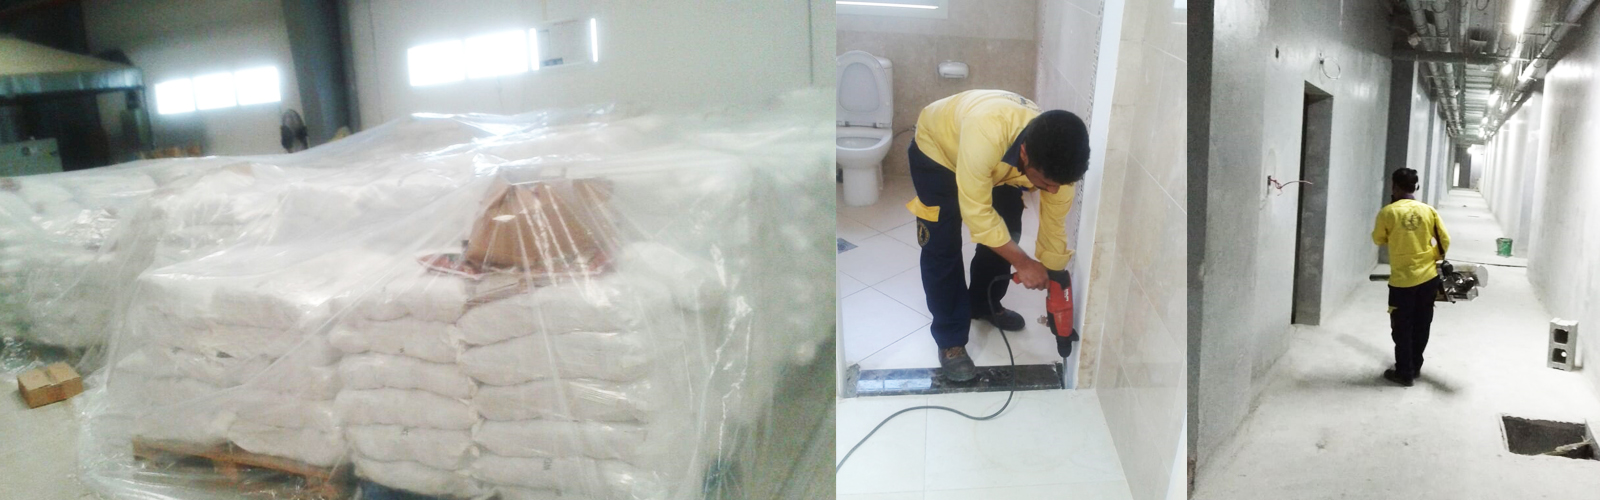 Speed Eagle Pest Control, Dubai, UAE, Best pest control services and cleaning services company in Dubai